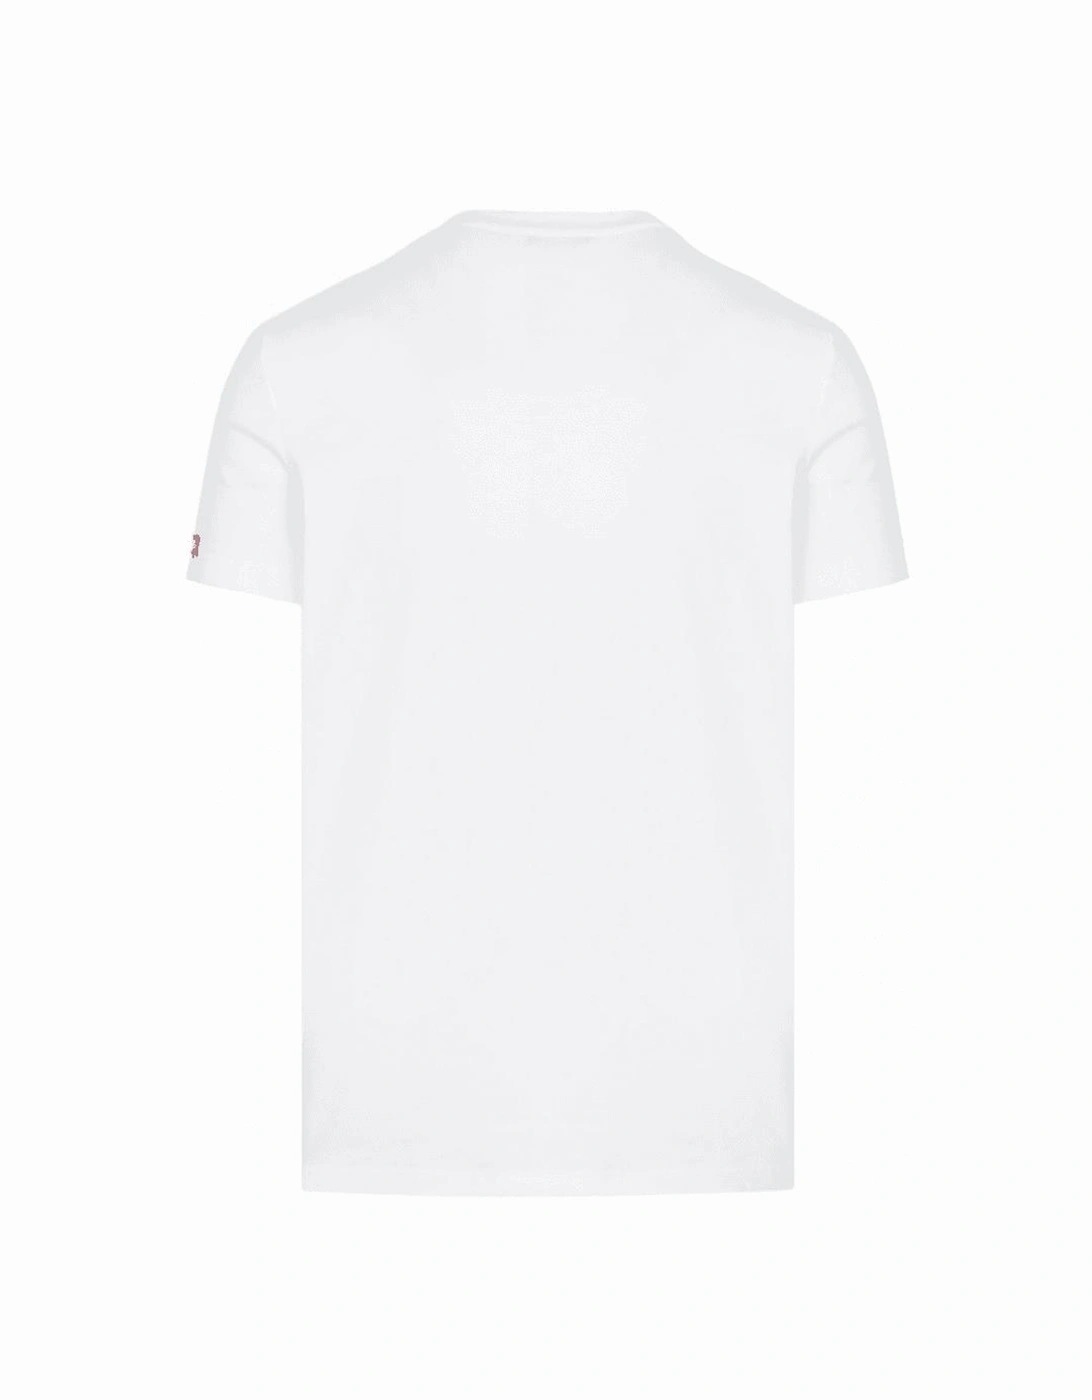 Red Maple Leaf Patch Logo White T-Shirt